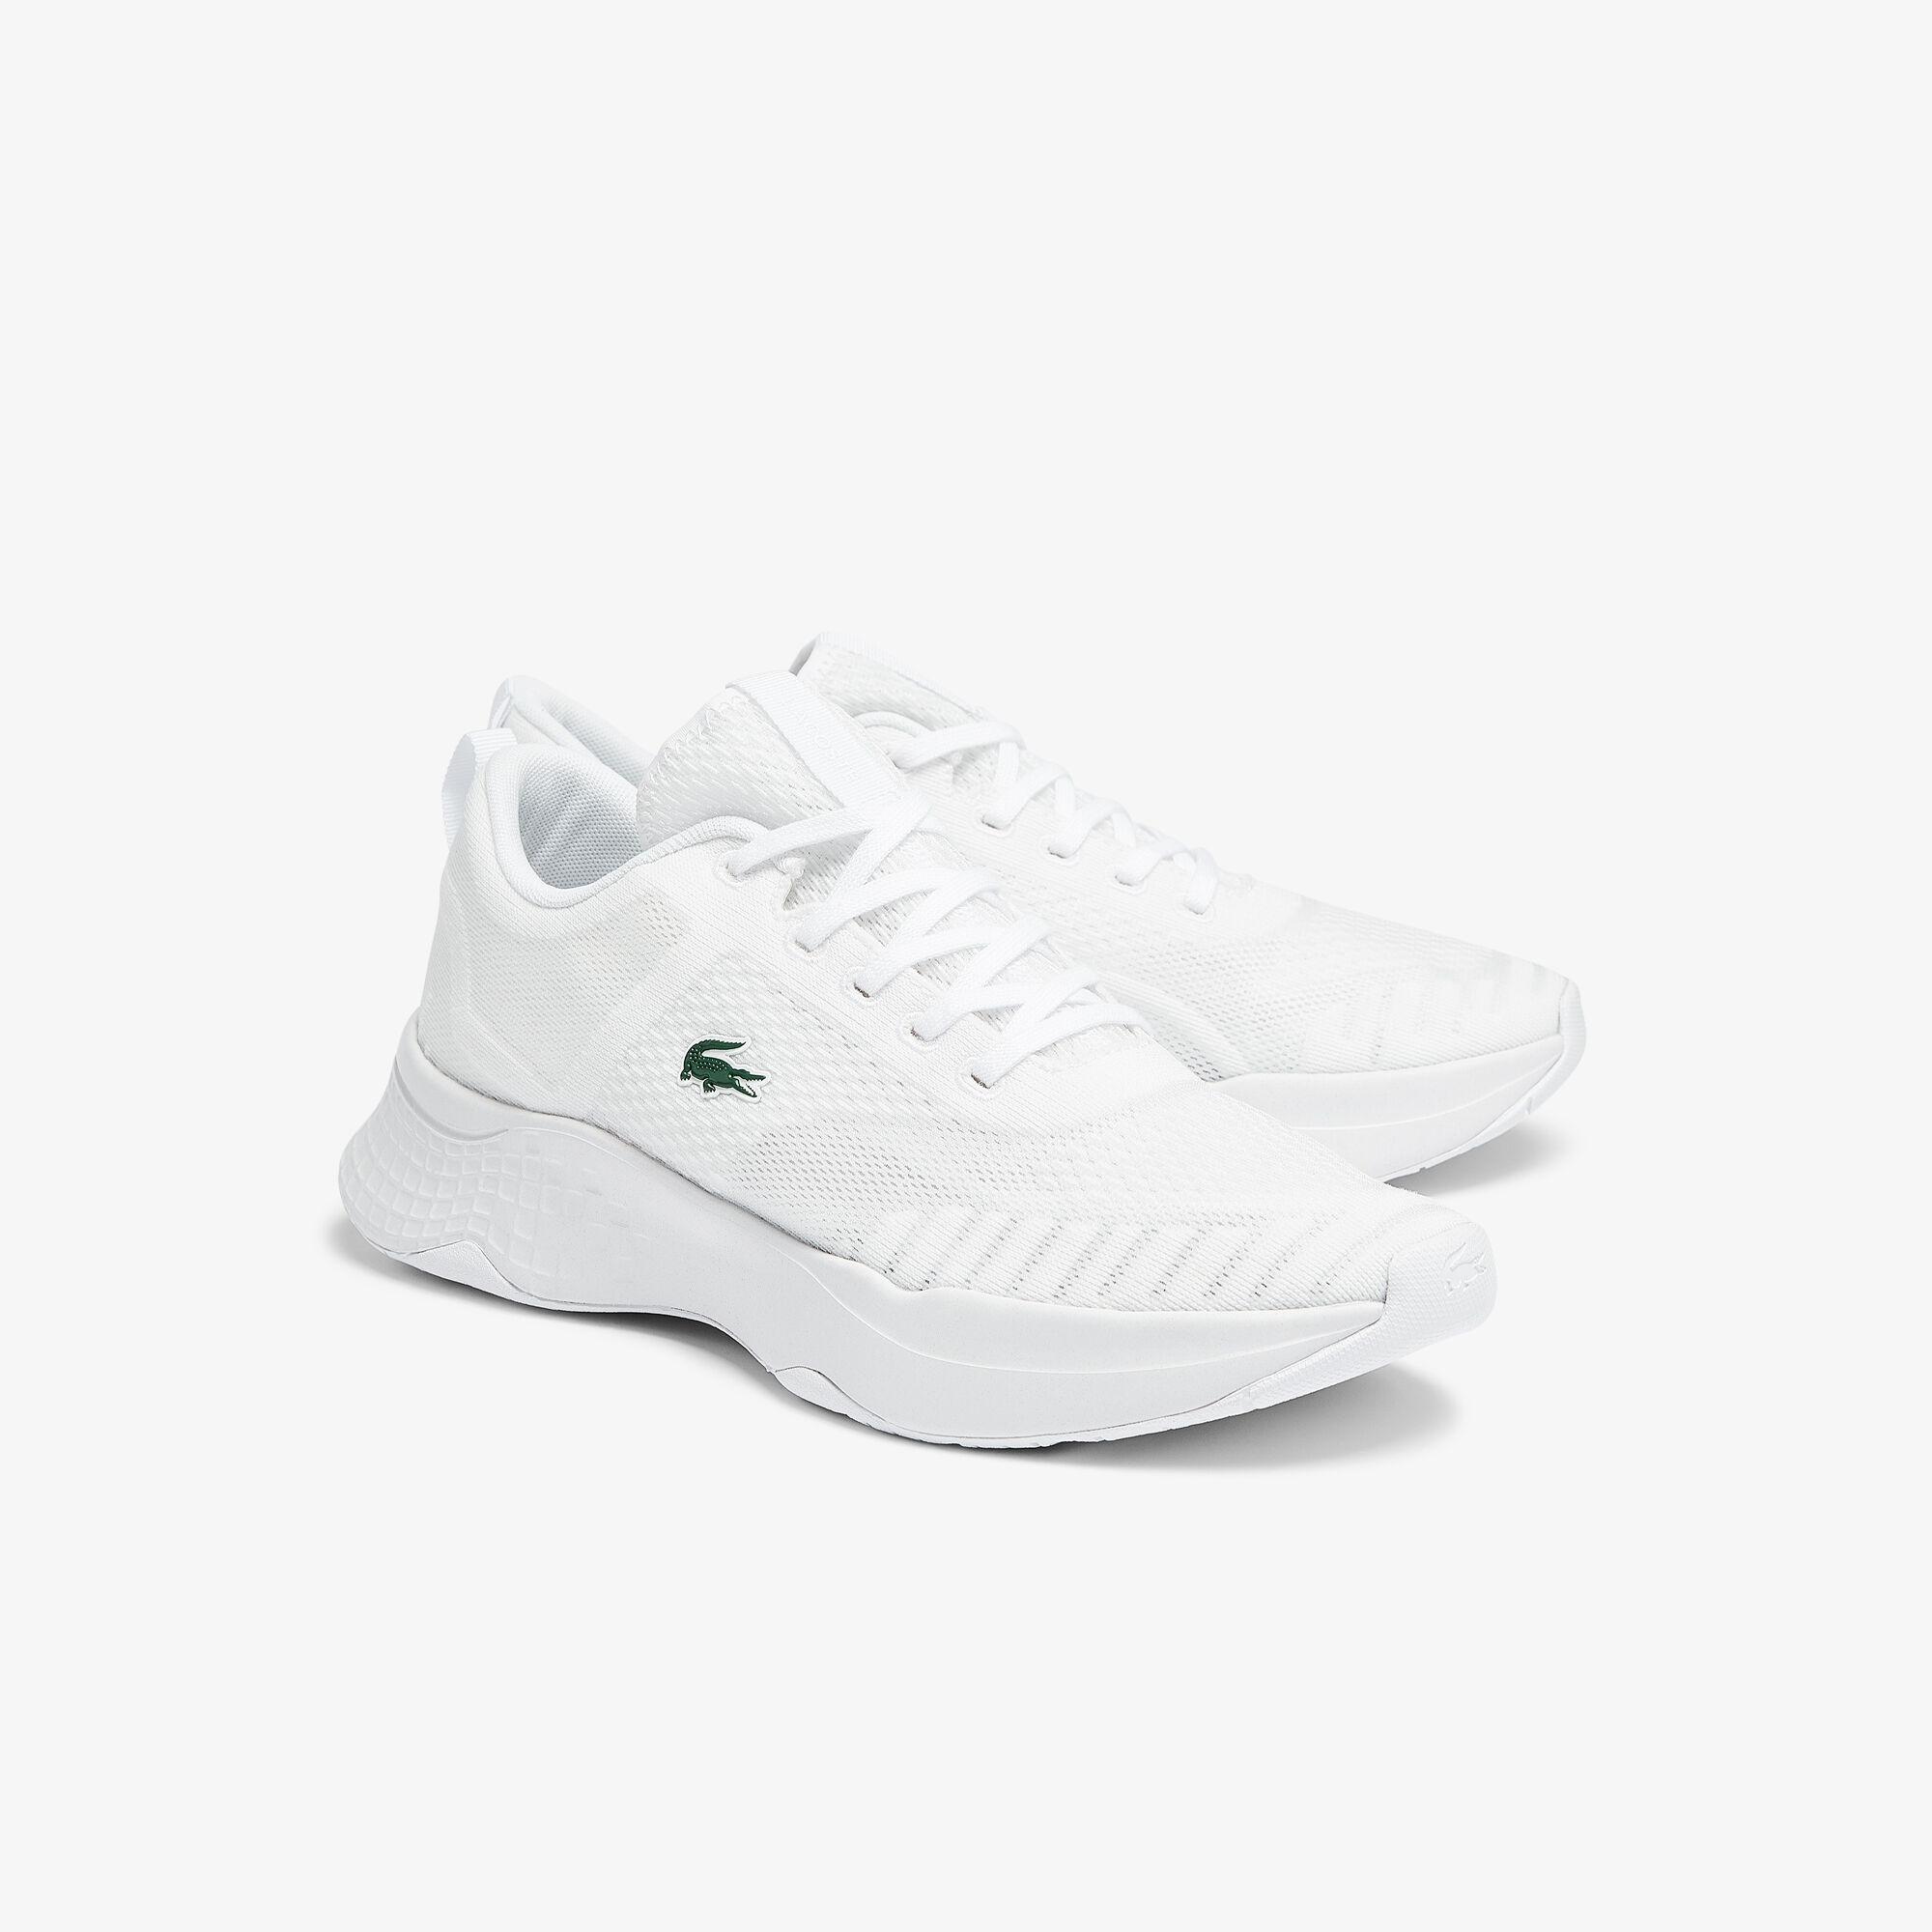 Men's Court-Drive Fly Textile Trainers